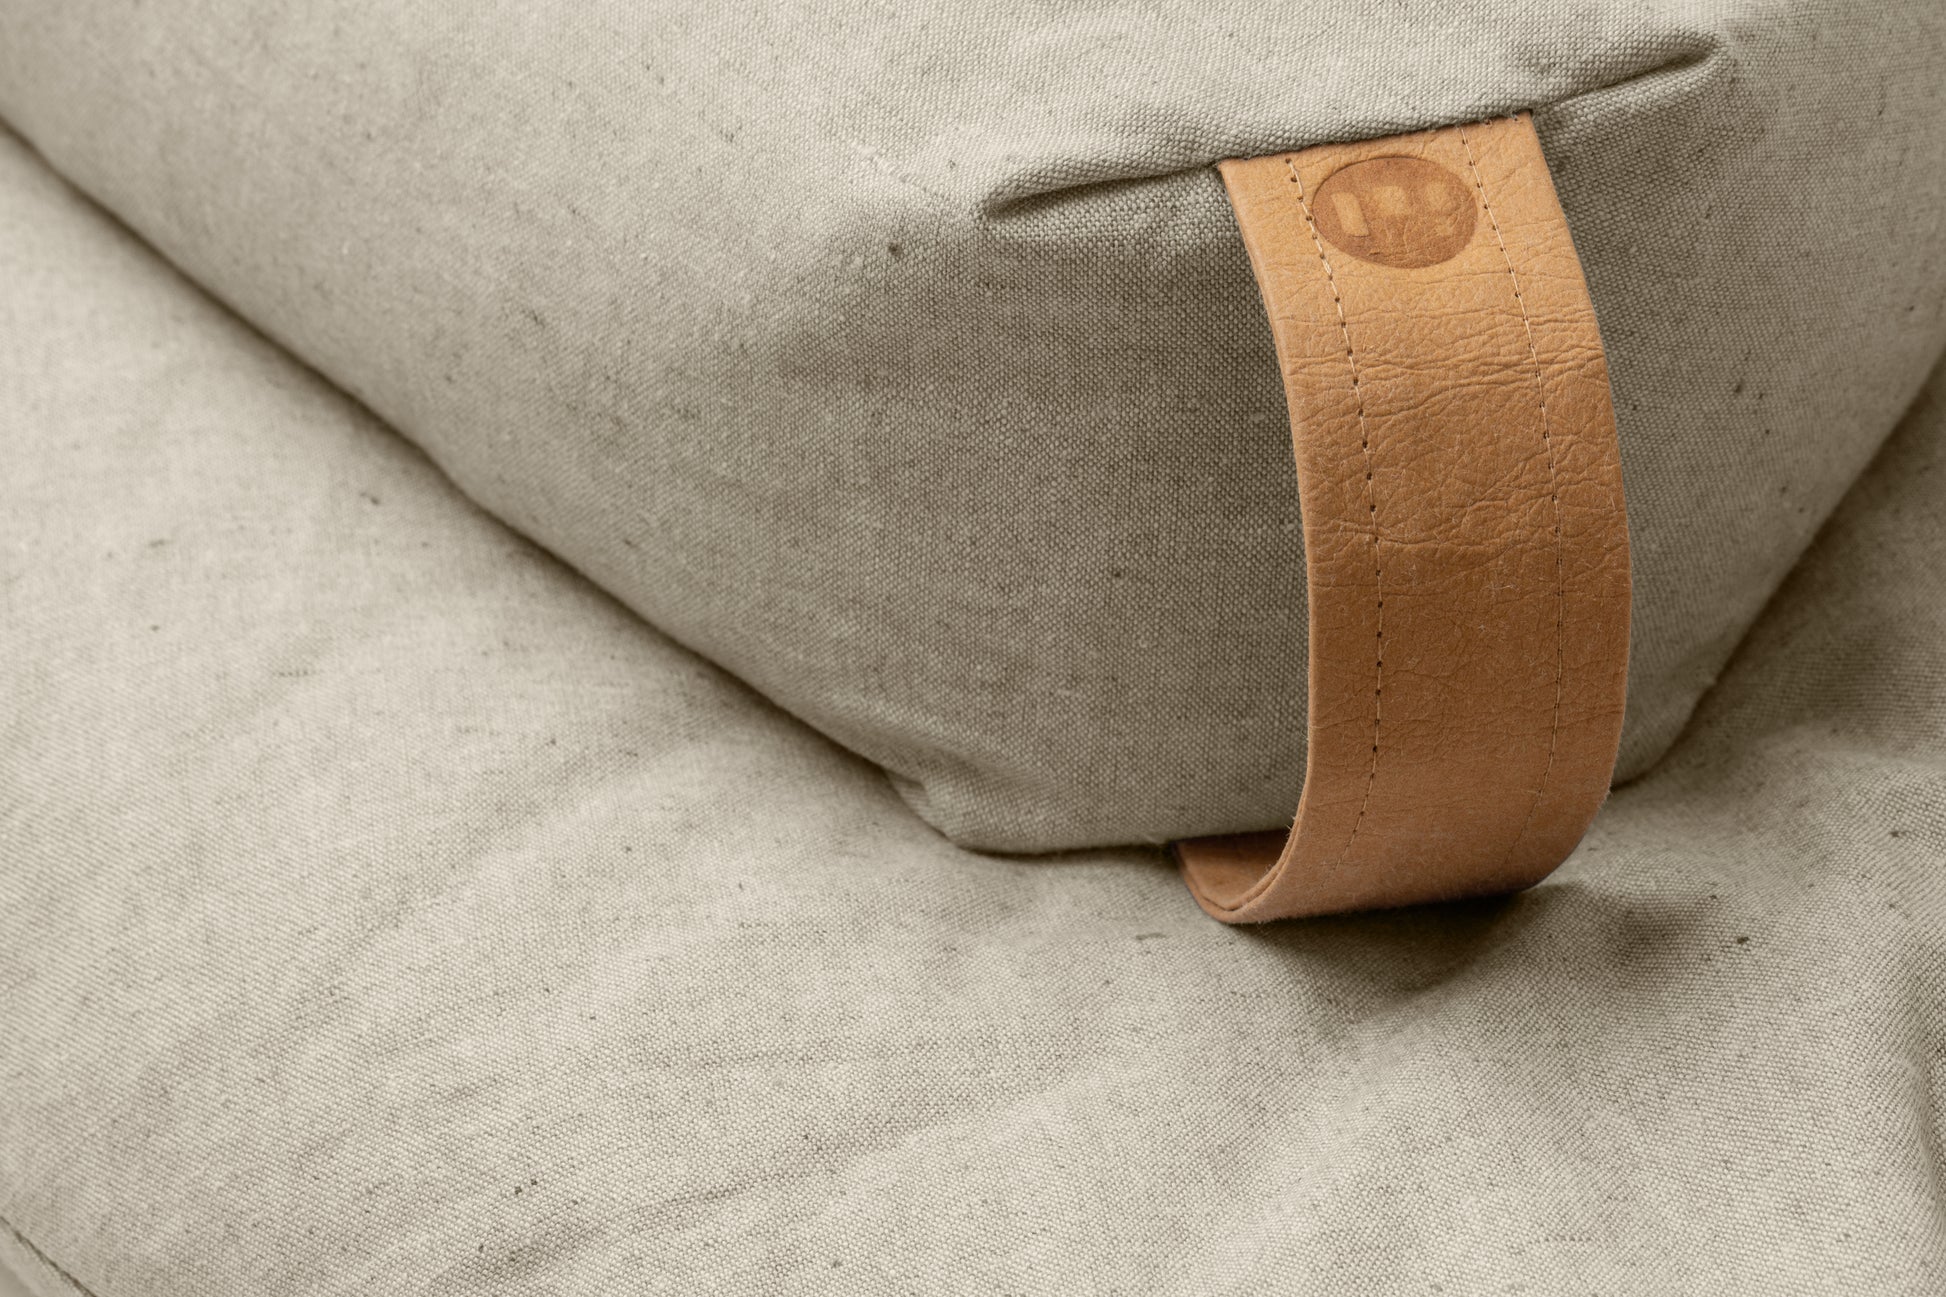 Weighted Meditation Support Cushion | Shop at KonMari by Marie Kondo